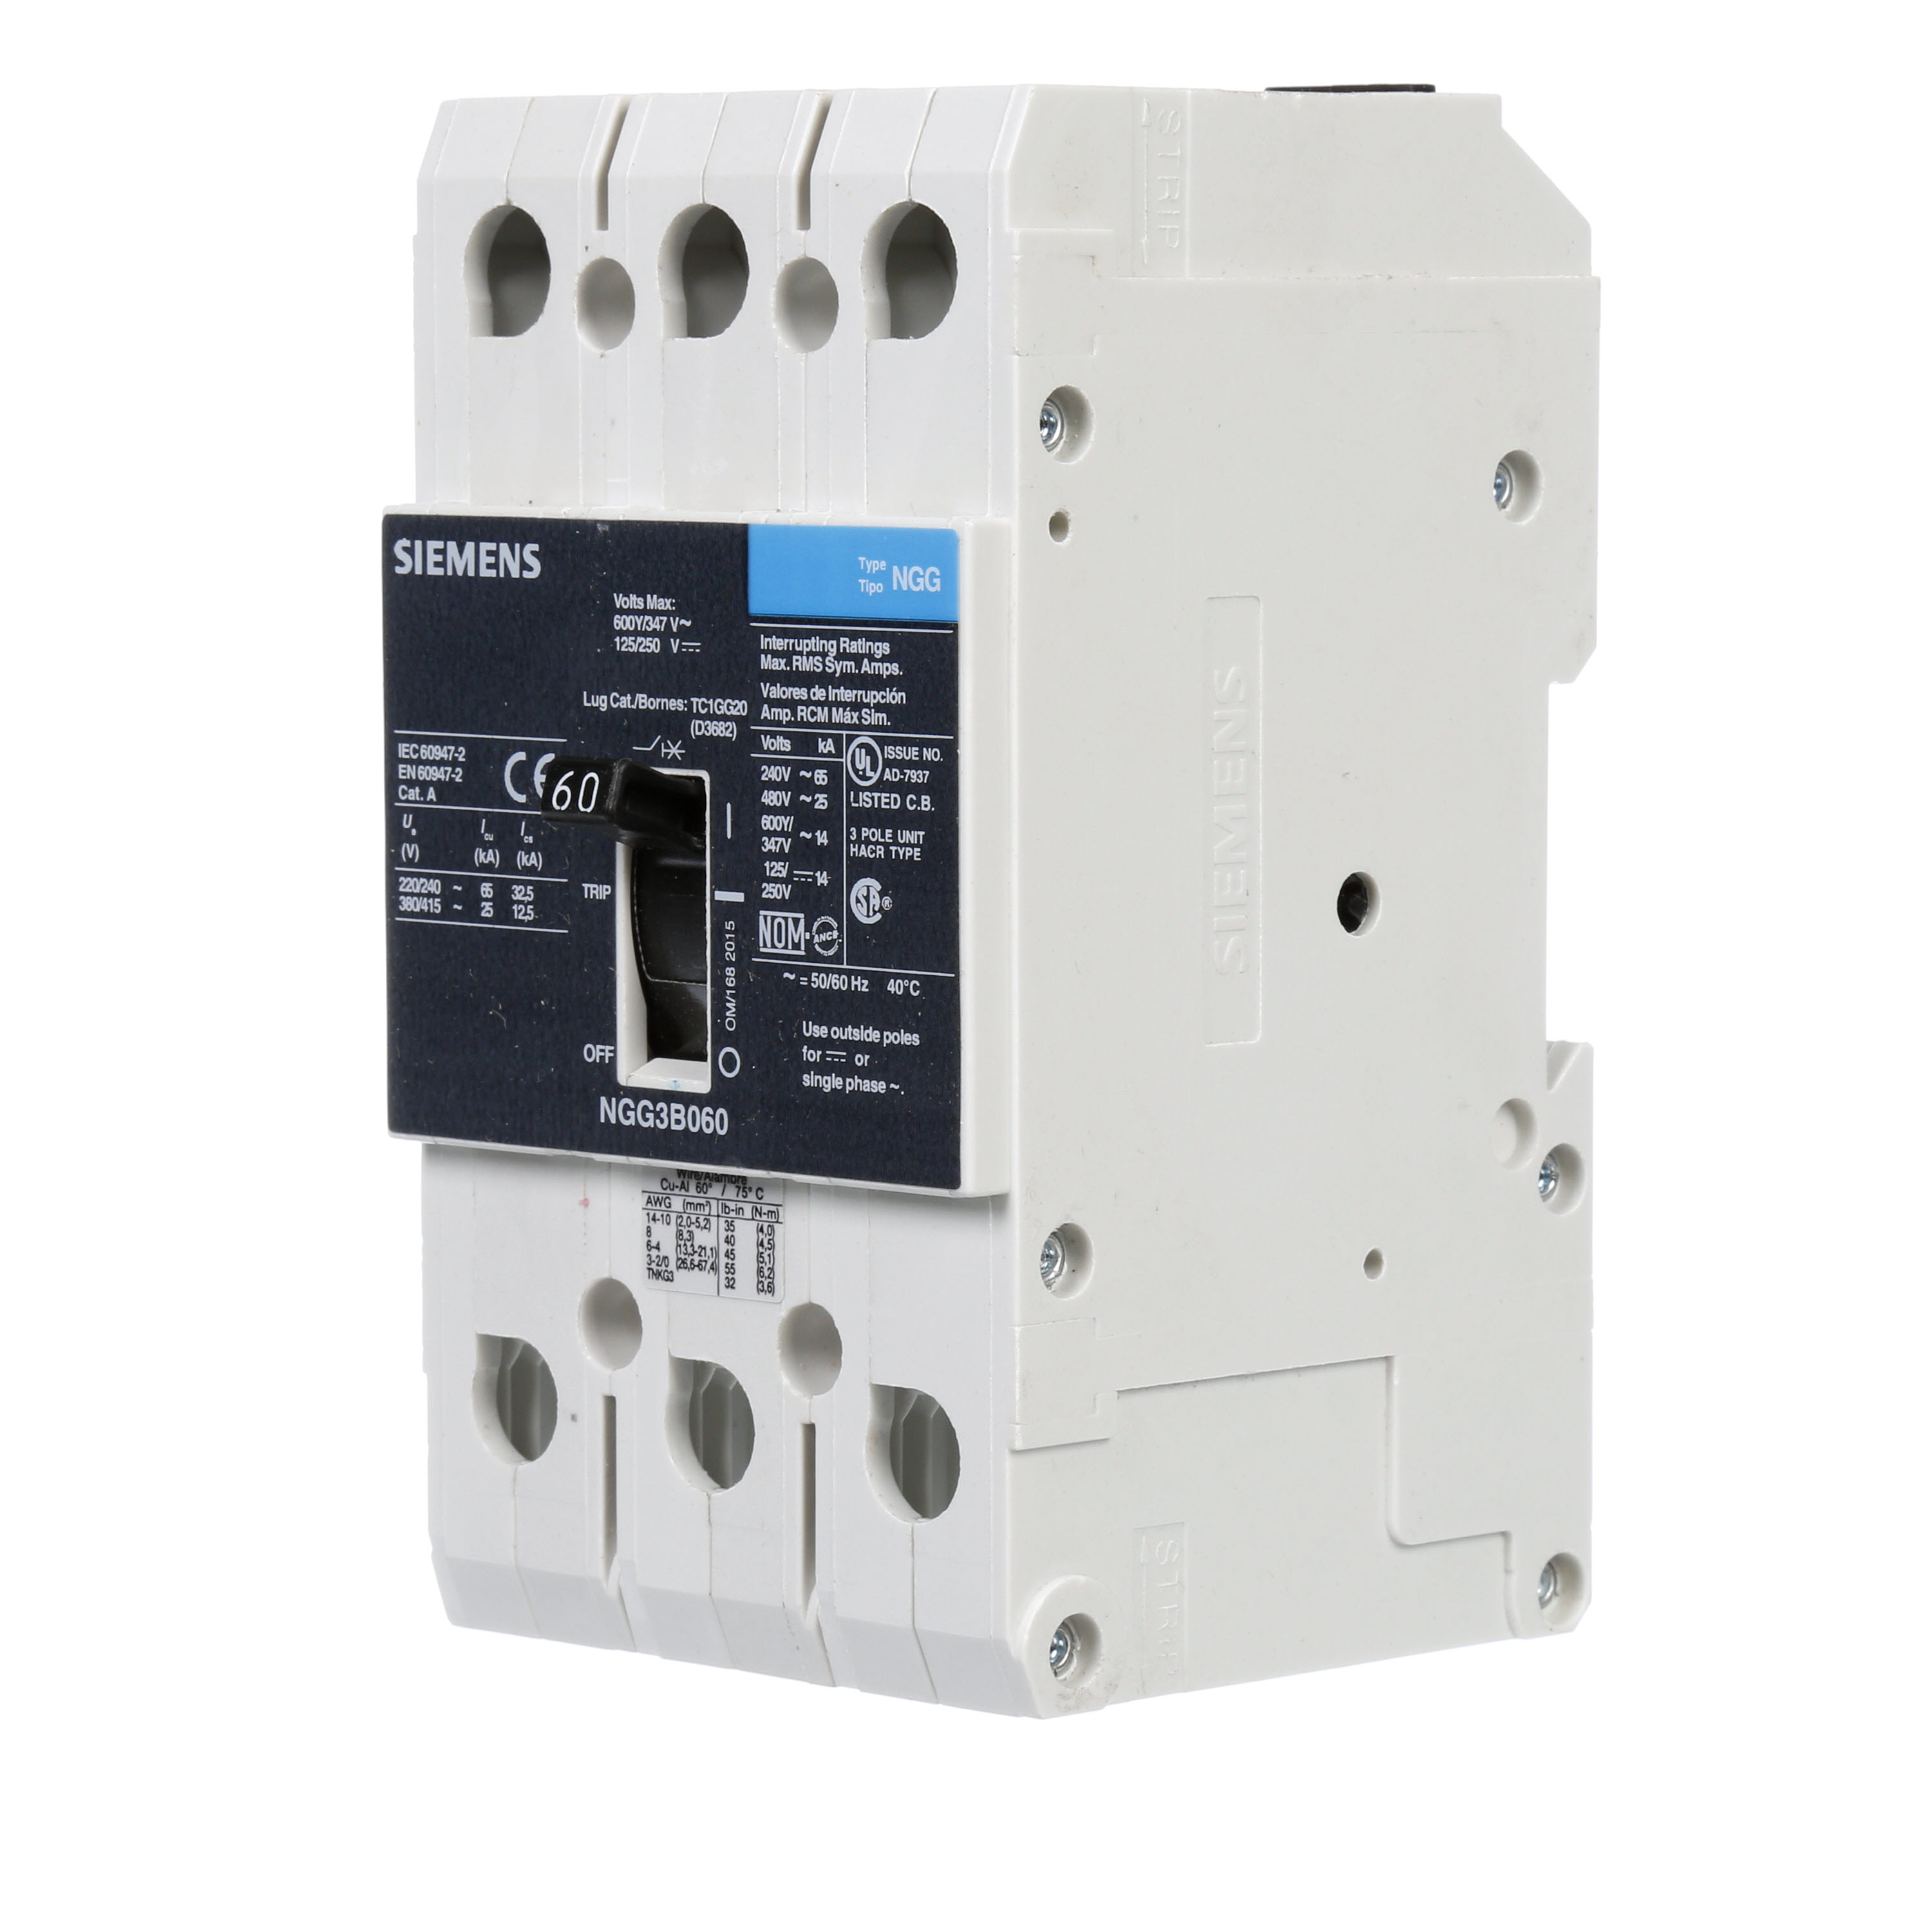 SIEMENS LOW VOLTAGE G FRAME CIRCUIT BREAKER WITH THERMAL - MAGNETIC TRIP. UL LISTED NGG FRAME WITH STANDARD BREAKING CAPACITY. 60A 3-POLE (14KAIC AT 600Y/347V)(25KAIC AT 480V). SPECIAL FEATURES MOUNTS ON DIN RAIL / SCREW, LINE AND LOAD SIDE LUGS (TC1GG20) WIRE RANGE 8 - 1/0 AWS (CU/AL). DIMENSIONS (W x H x D) IN 3 x 5.4 x 2.8.